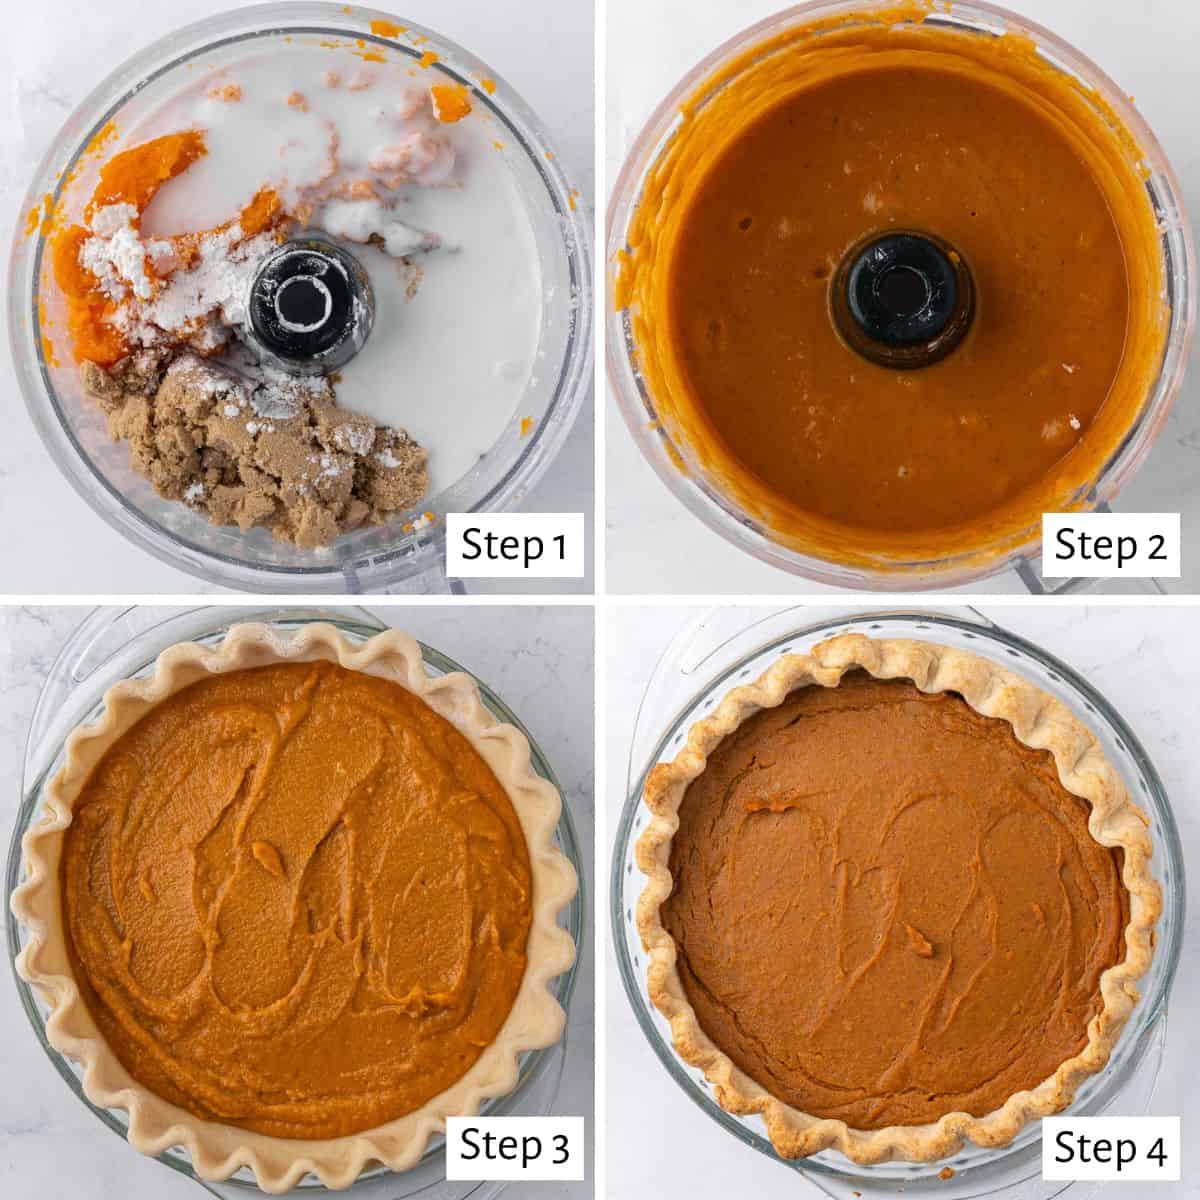 4 image collage making recipe filling: 1- ingredients in a food processor before processing, 2- after to show smooth consistency, 3- added to pie crust before baking 4- after baking.